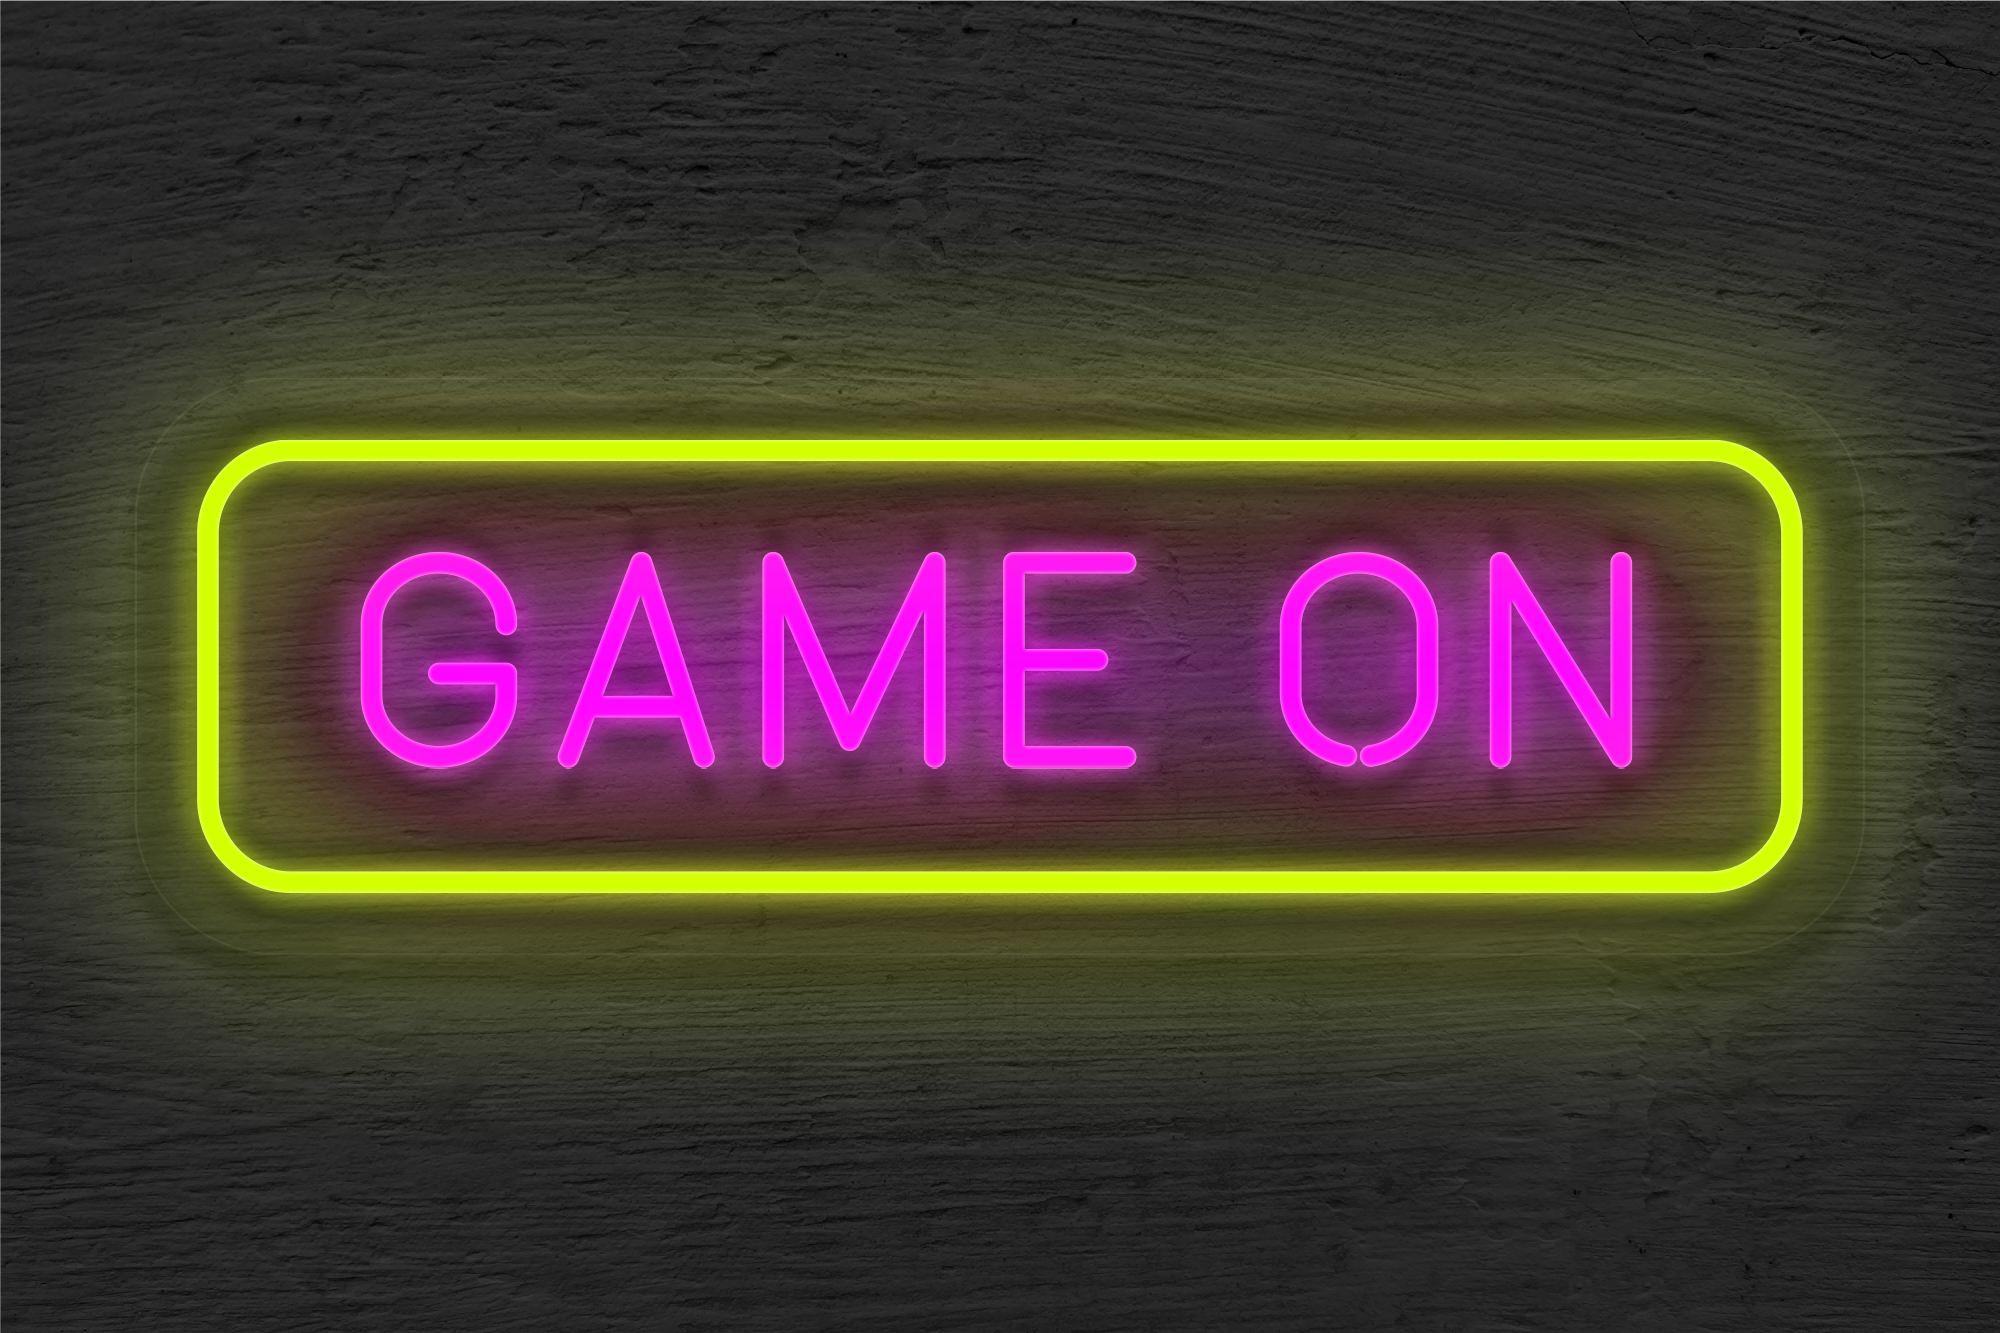 "Game On" with Border LED Neon Sign